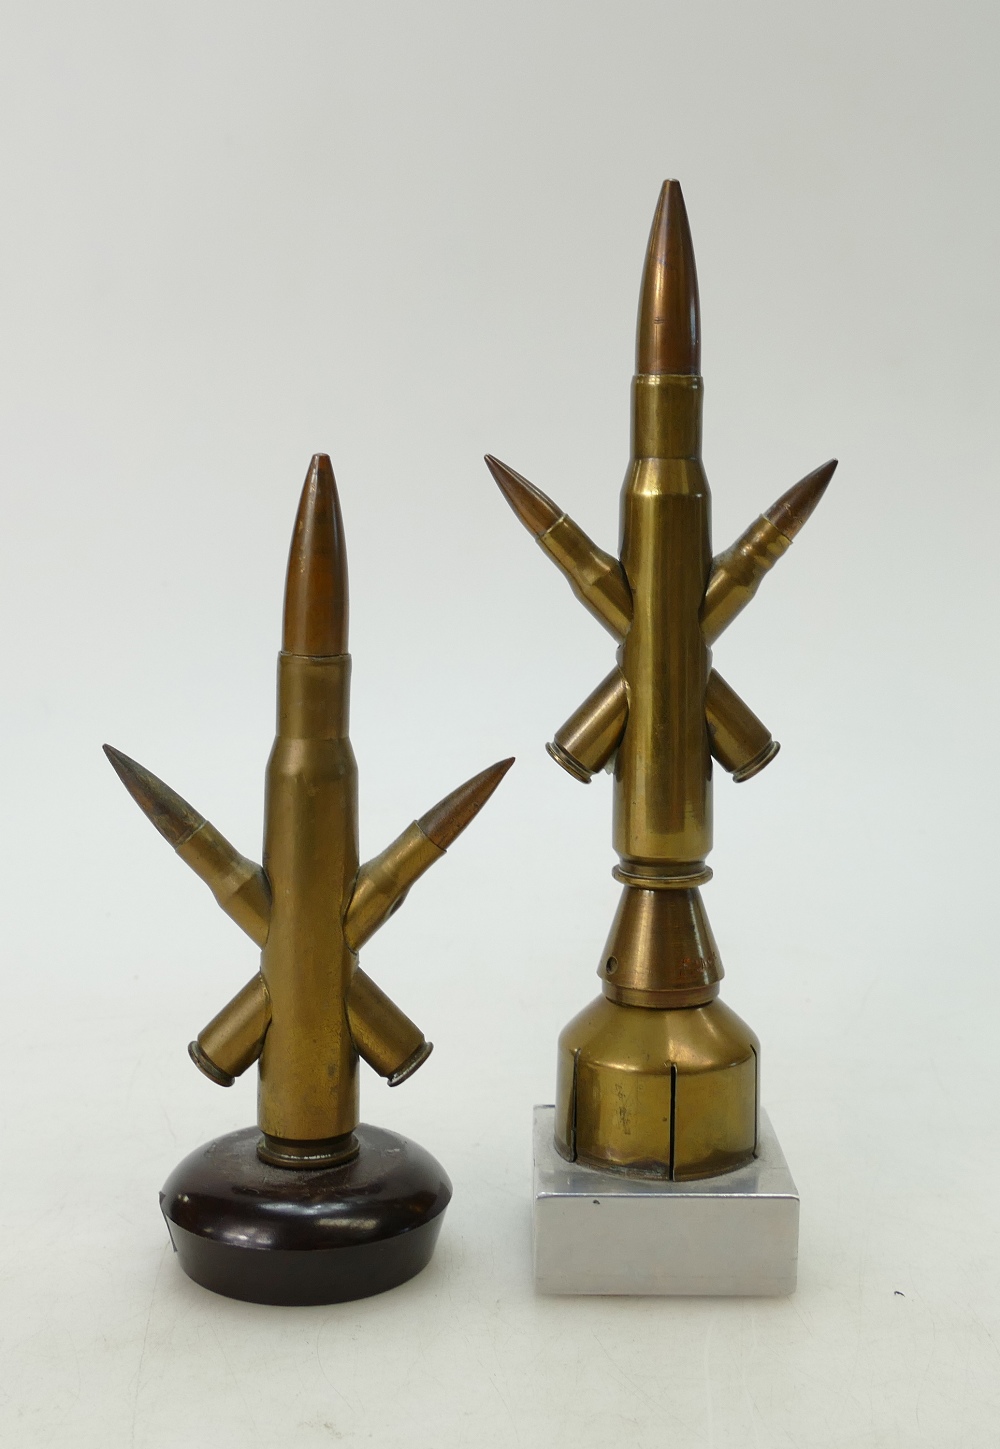 Trench art .50 cal round with two .303 bullets both mounted on stands. One stamped Hill 62. 23cm.